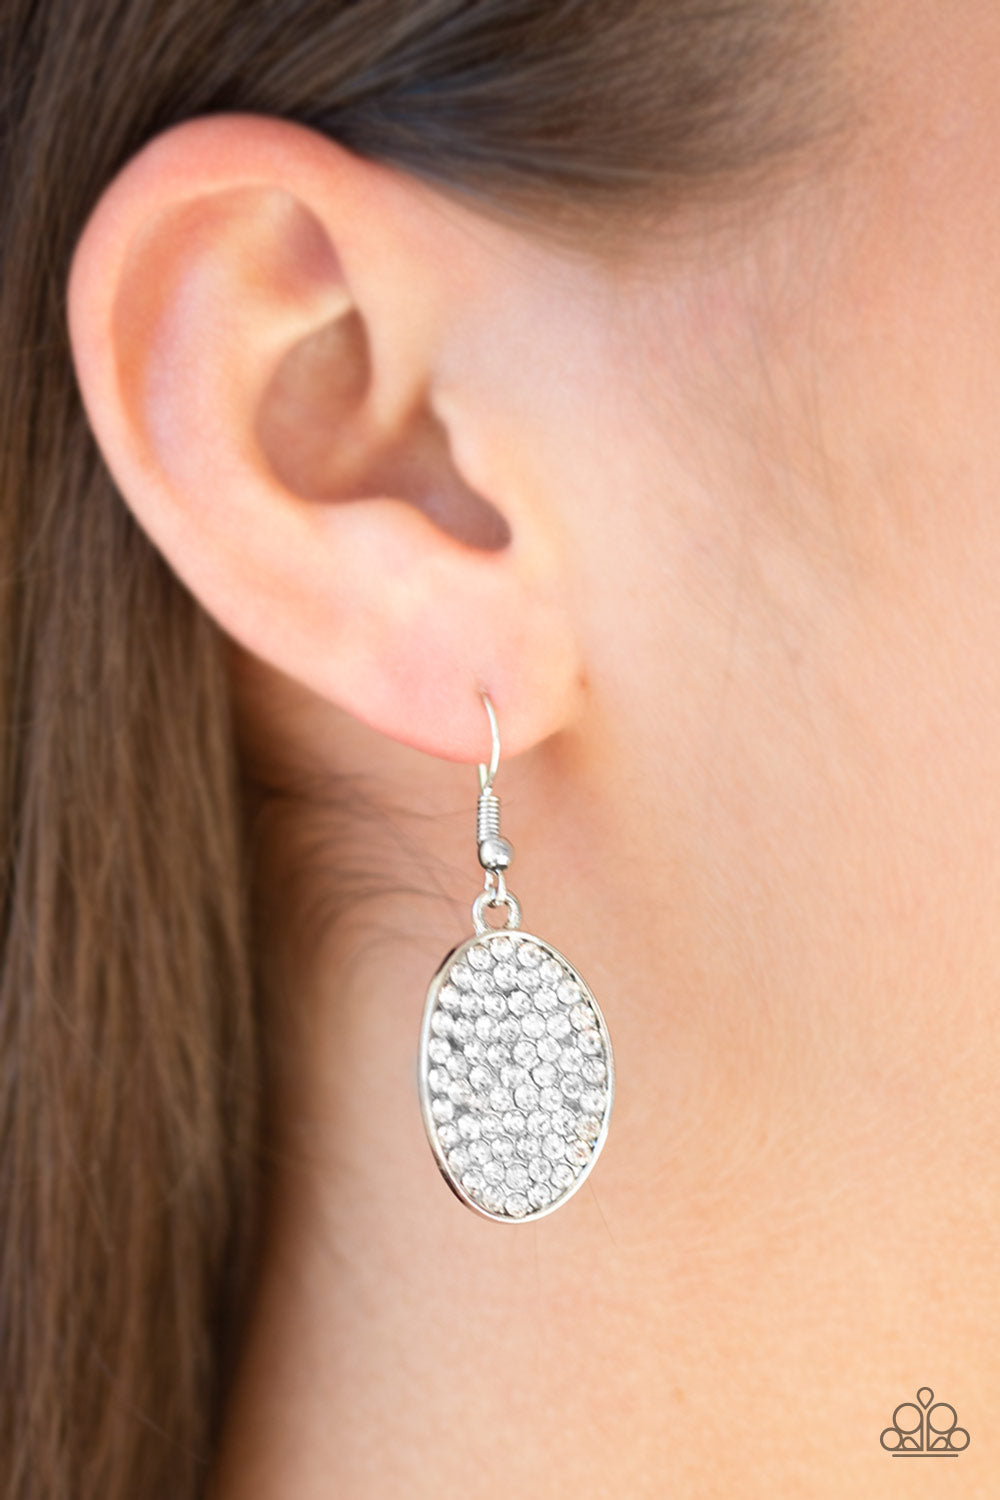 ALL DAZZLE - WHITE ASYMETRICAL OVAL CLEAR RHINESTONES ENCURSTED DAINTY EARRINGS